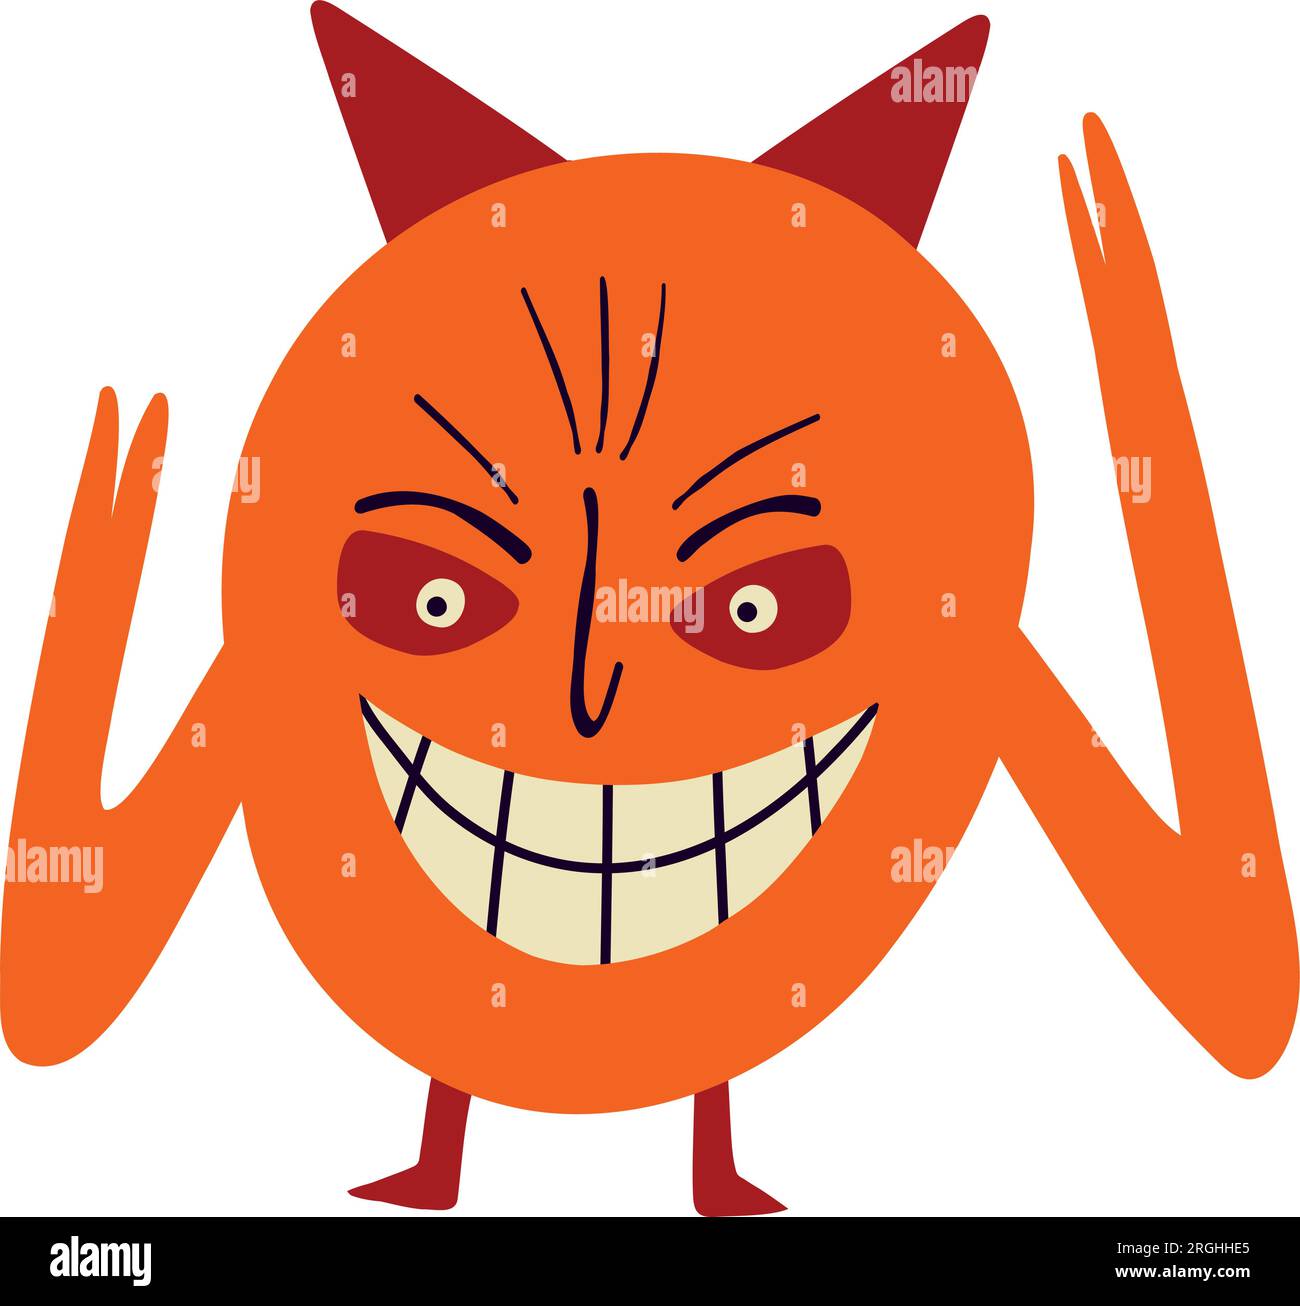 Evil angry orange monster character with funny smile face. Illustration in a modern childish hand-drawn style Stock Vector